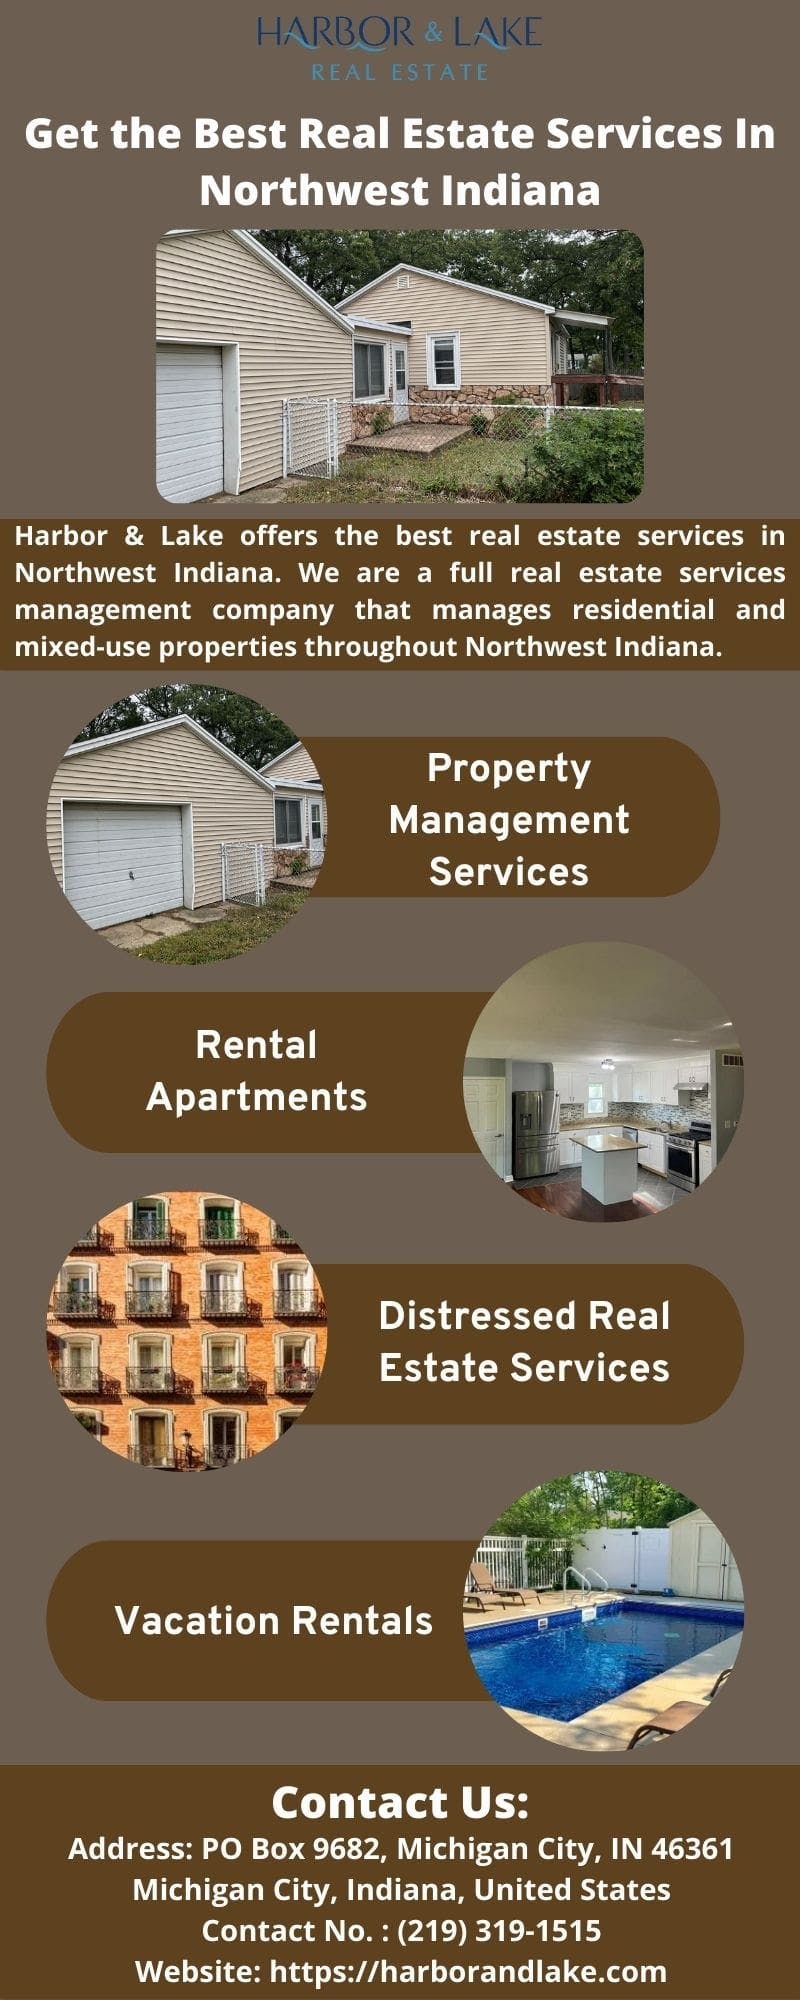 Get the Best Real Estate Services In Northwest Indiana.jpg